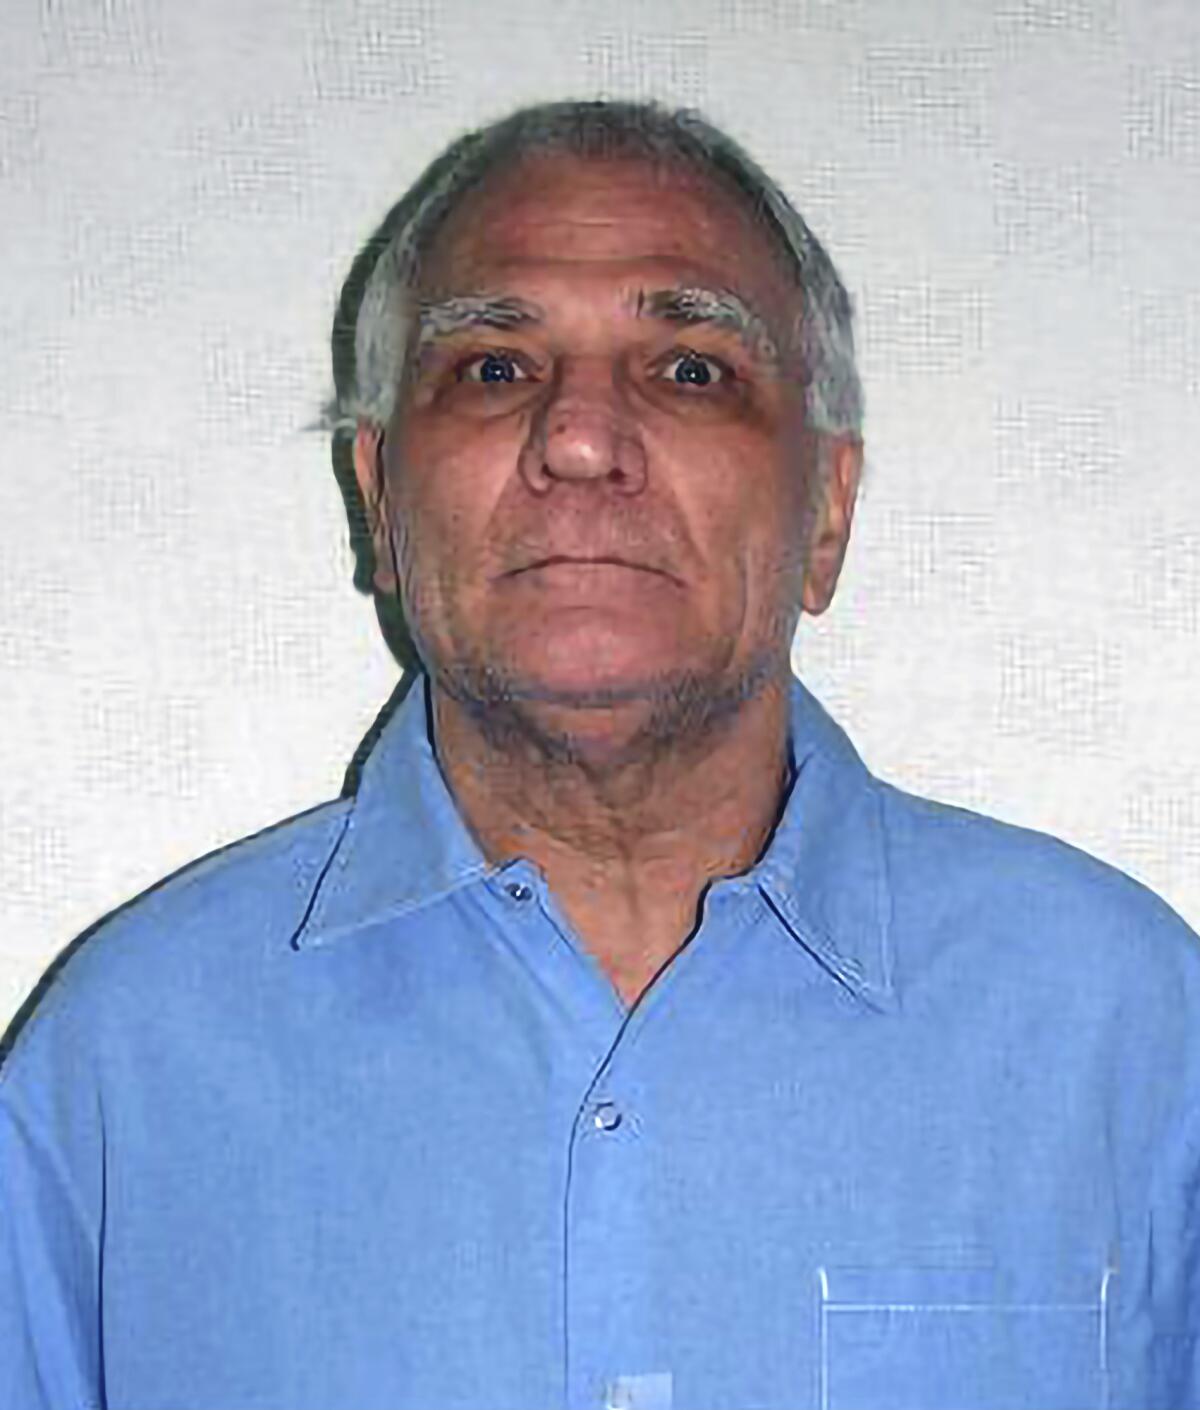 This undated photo provided by the California Department of Corrections and Rehabilitation shows Harvey Heishman, an inmate at San Quentin State Prison. Heishman who had been sentenced to death was pronounced deceased on Tuesday, July 5, 2022. Heishman died in San Quentin State Prison's infirmary on Tuesday, June 5. Officials said Wednesday his cause of death will be determined by the Marin County coroner. (CDCR via AP)